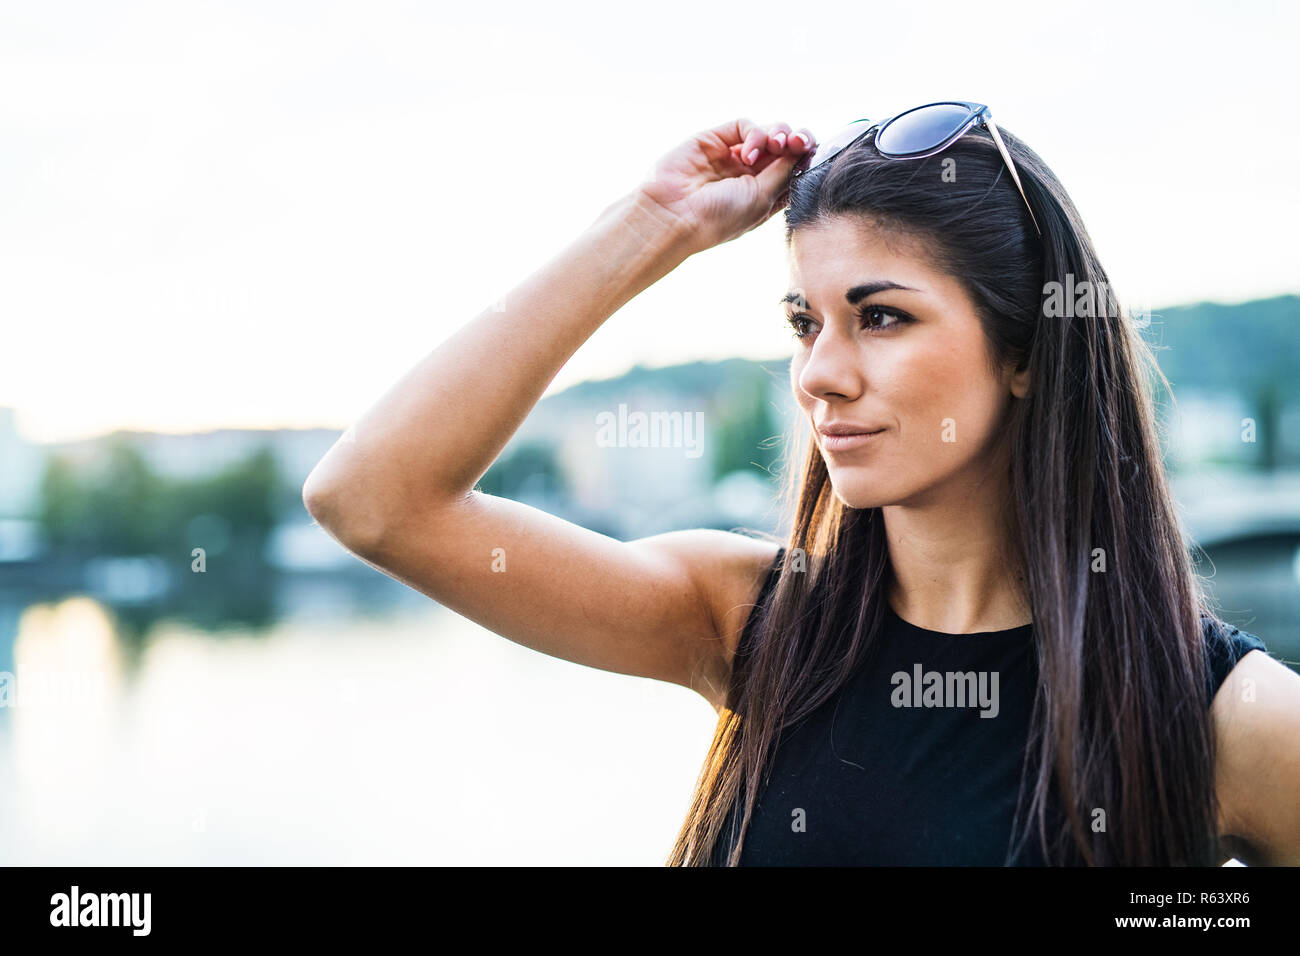 Beautiful woman in black dress standing by a river in city of Prague, holding sunglasses. Stock Photo